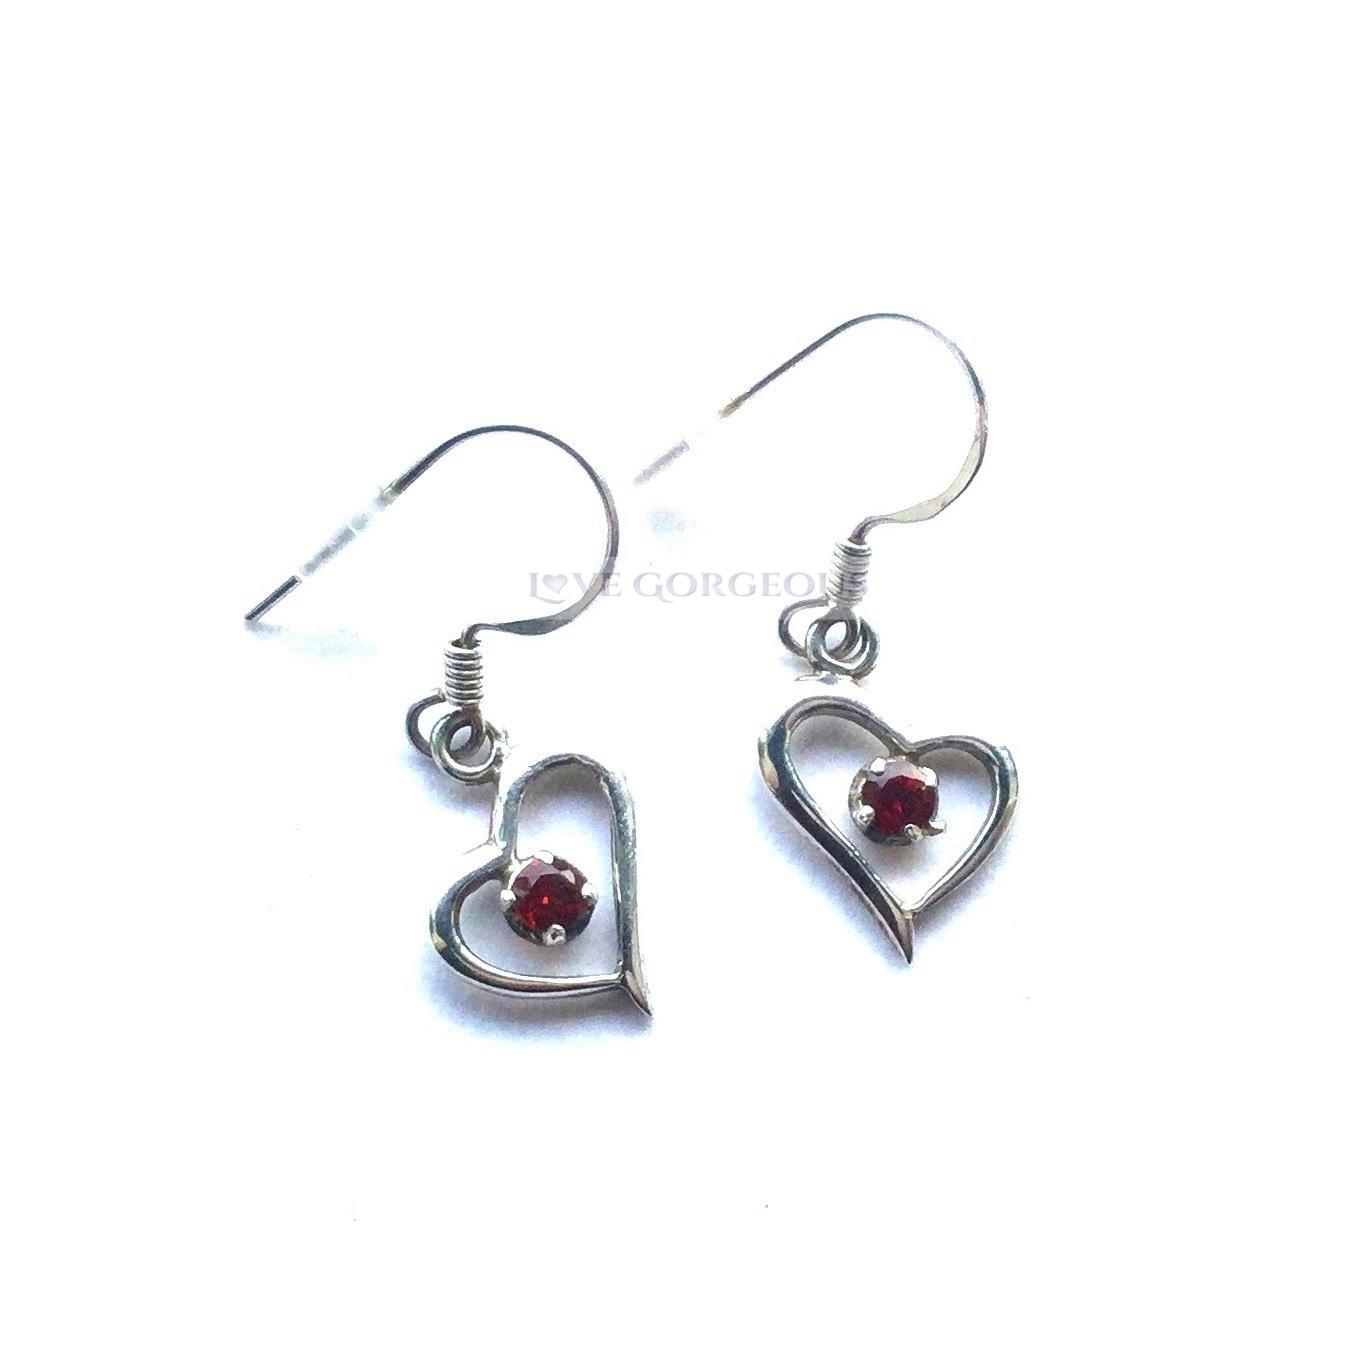 Heart and Garnet earrings from Love Gorgeous